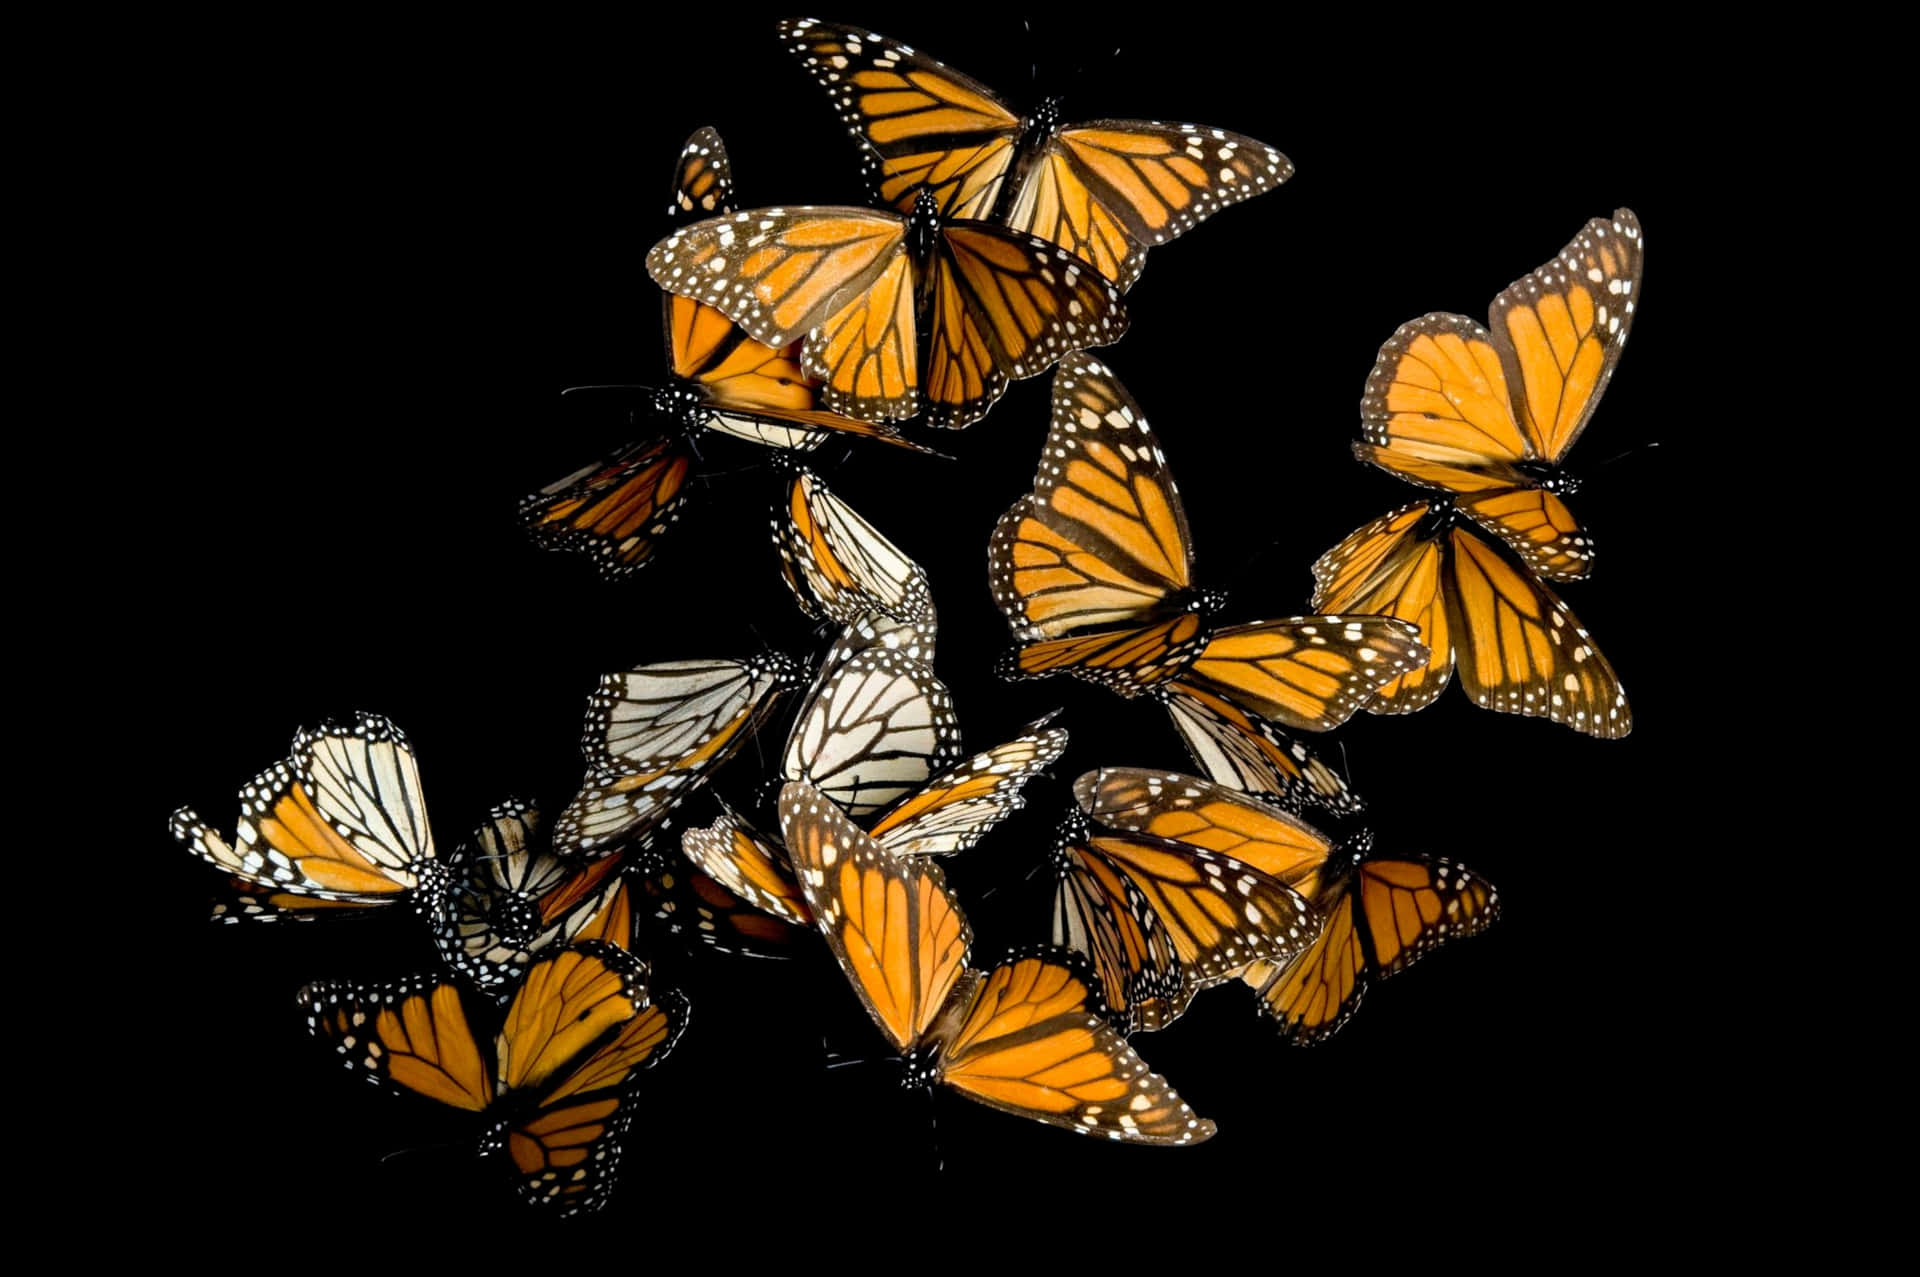 A Group Of Monarch Butterflies Flying In The Air